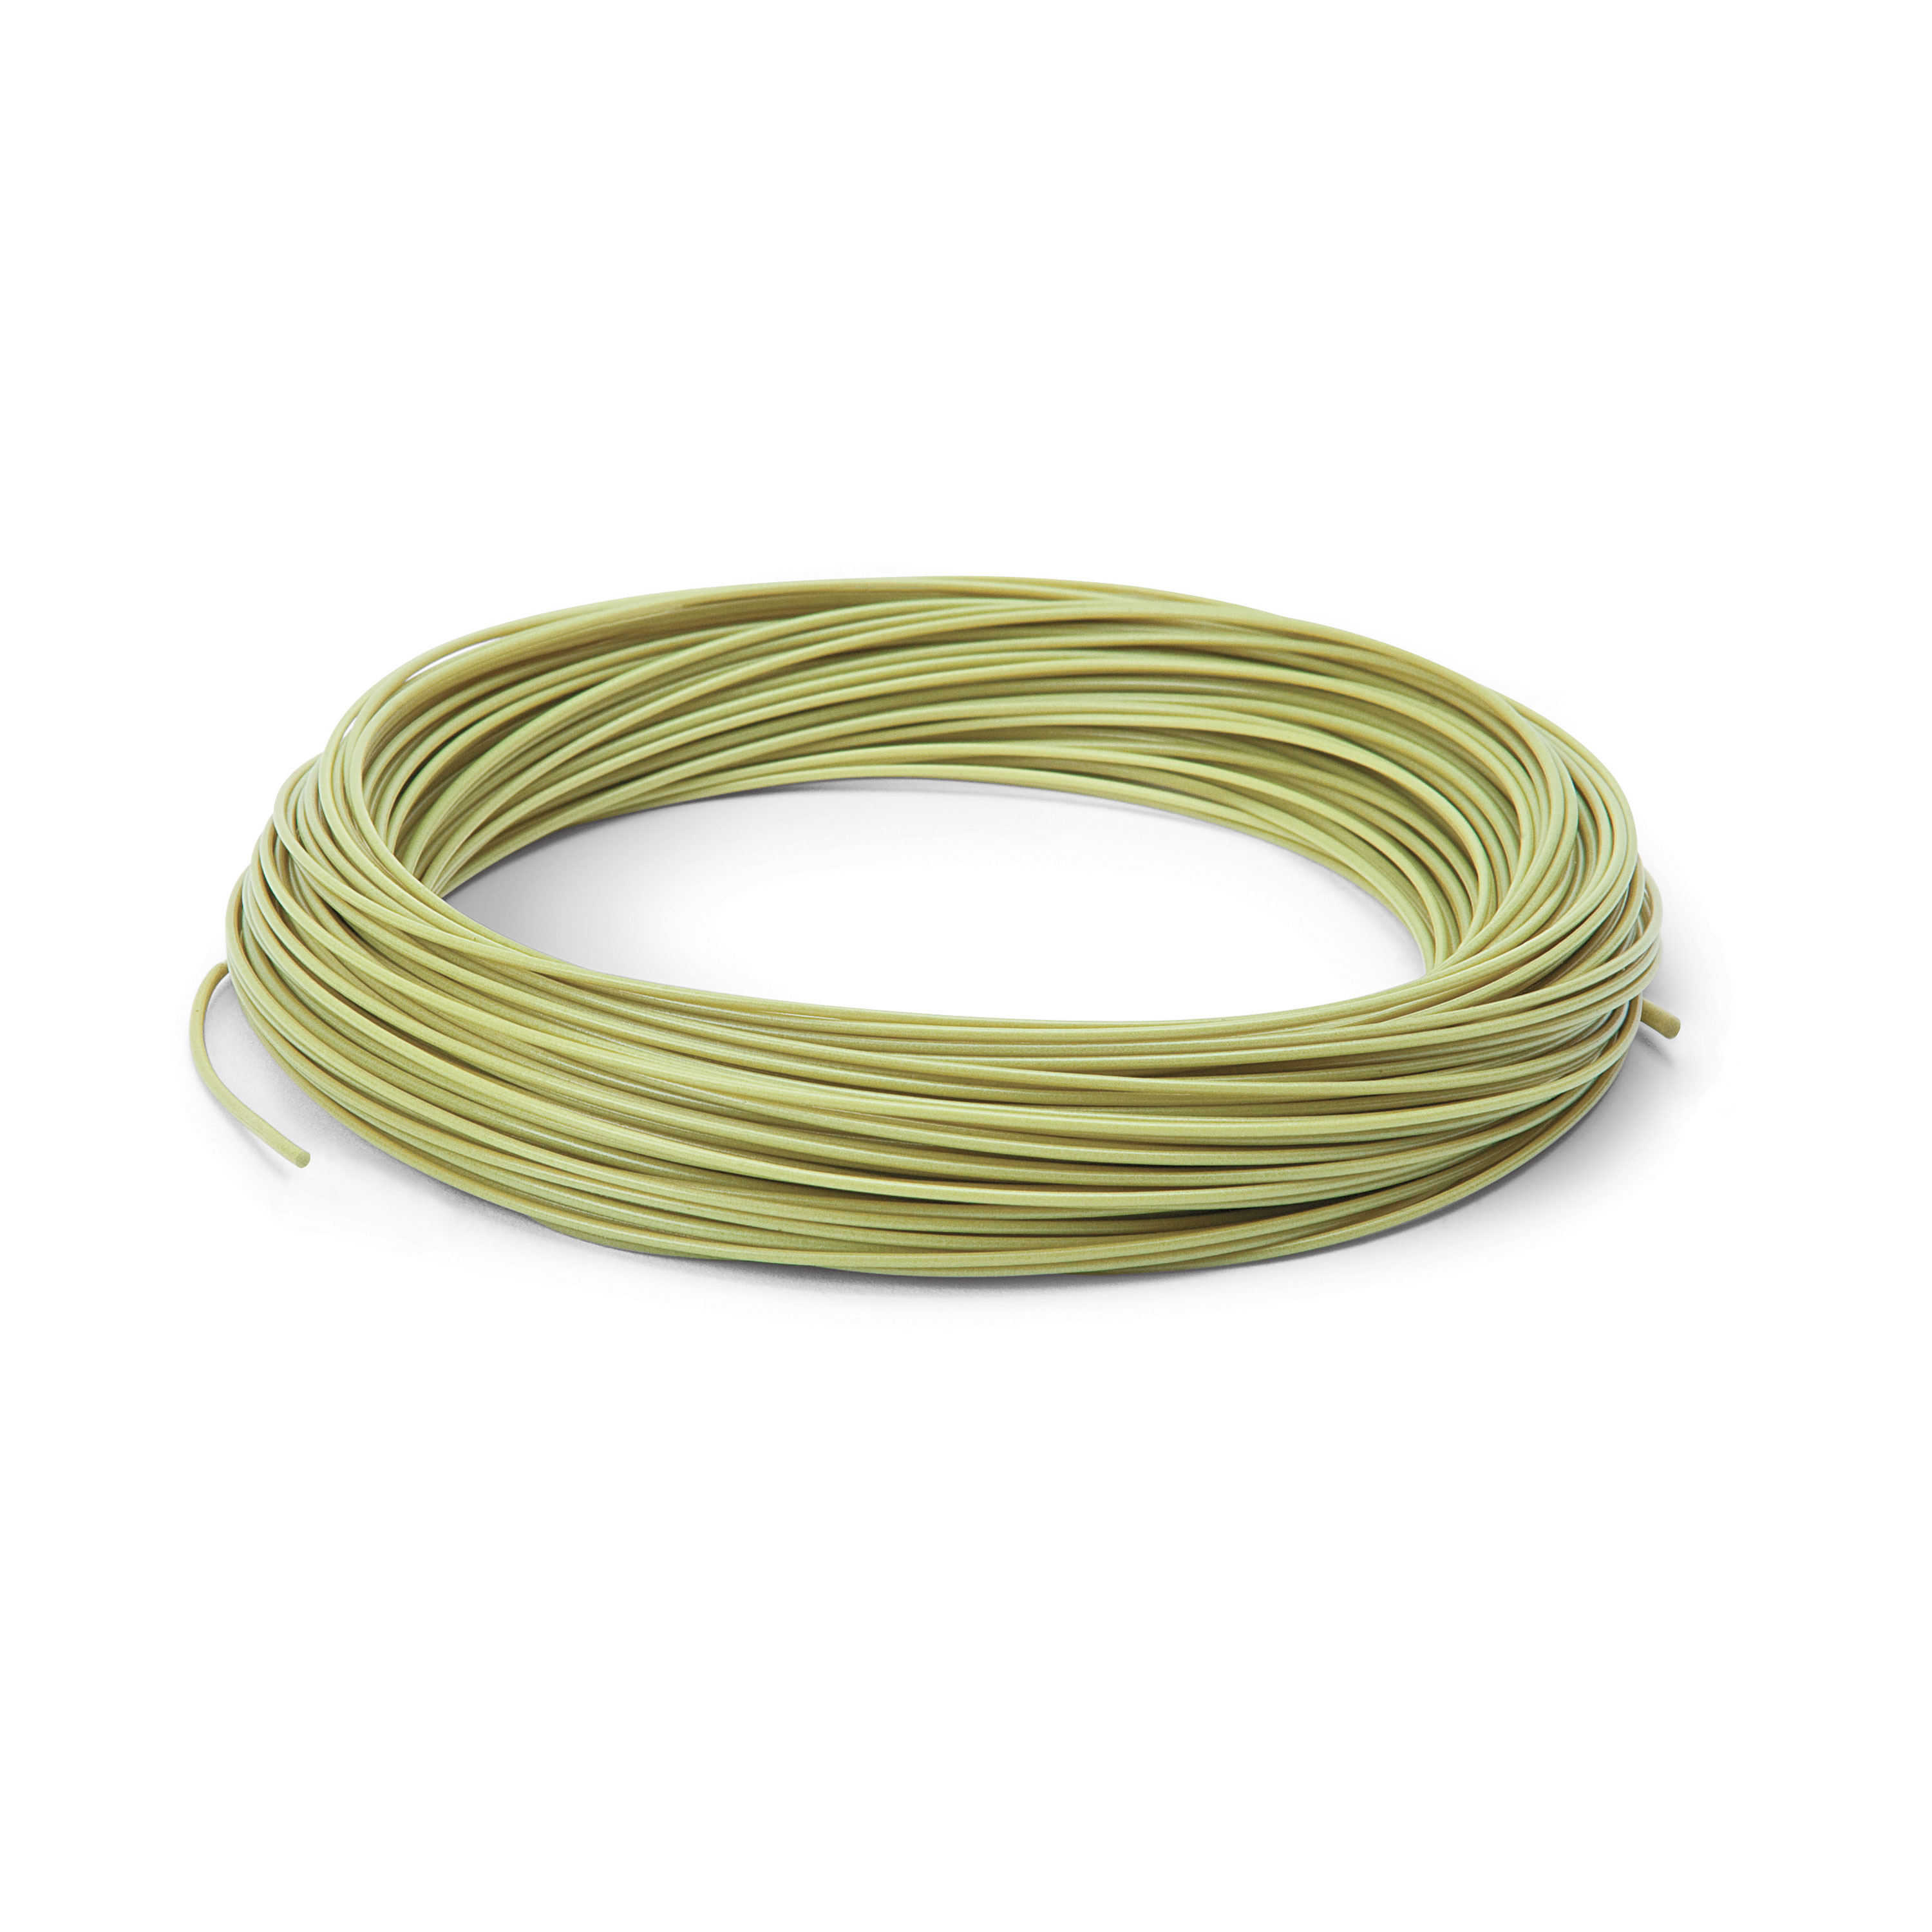 Fly Line Braid Core Cortland COMPETITION SERIES